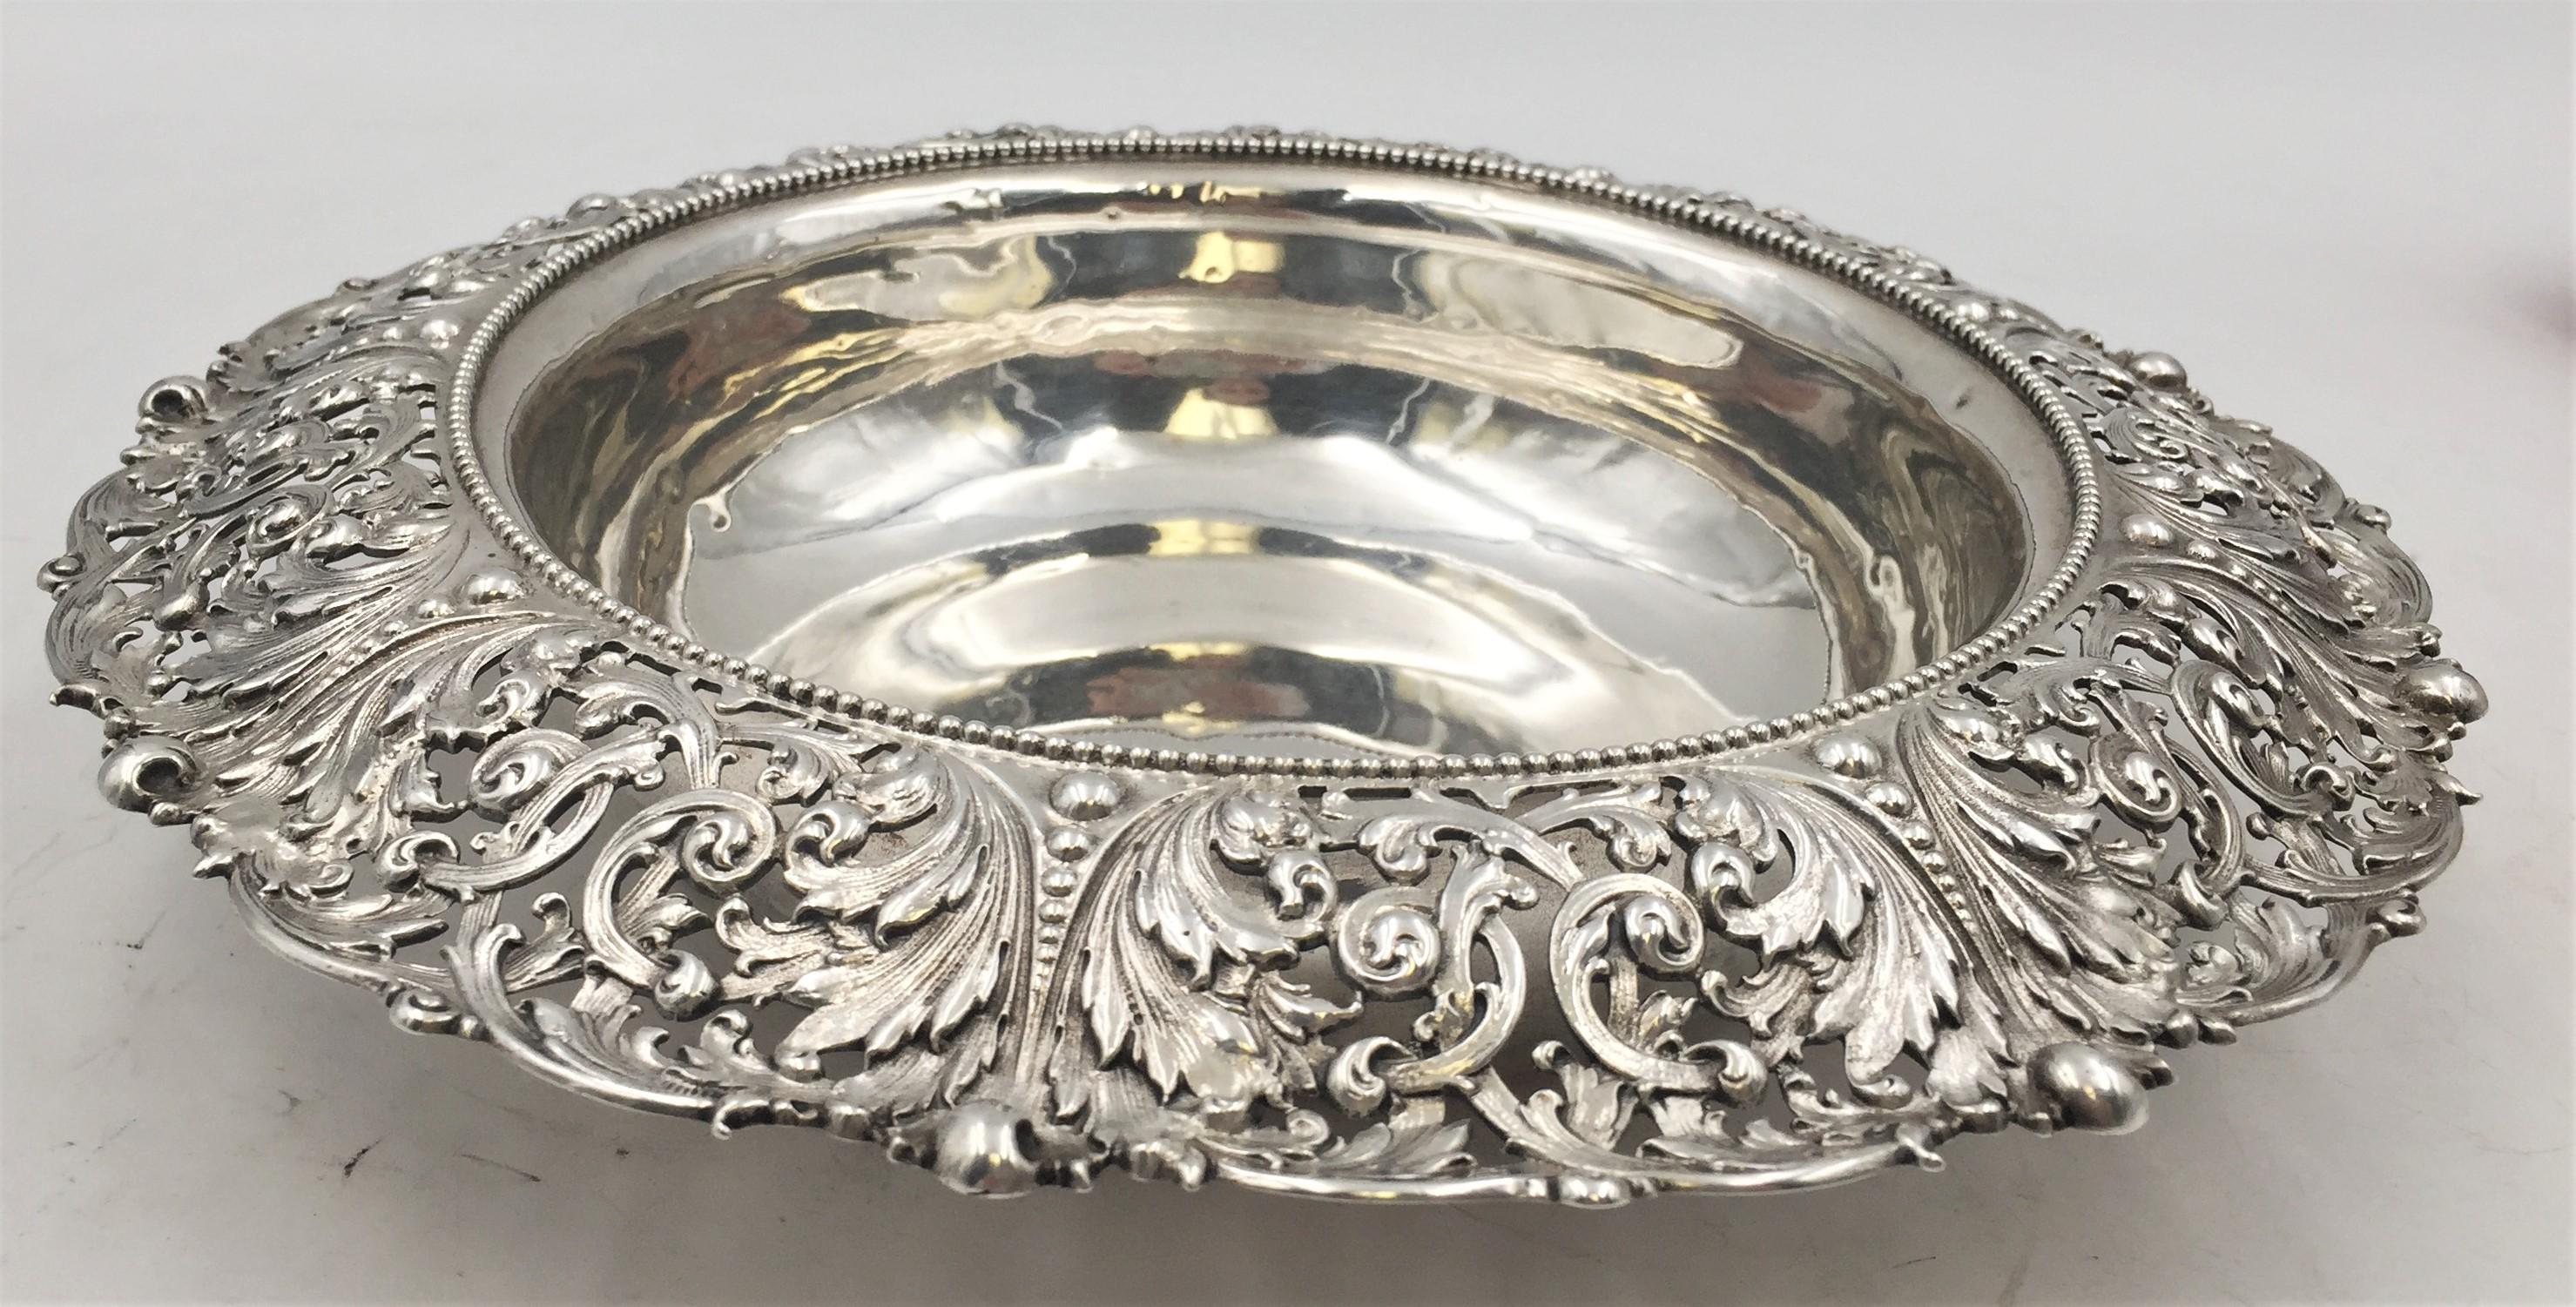 Sterling silver centerpiece or bowl by Marcus & Co with detailed foliate and scrolls. Measuring 10 inches in diameter and 2 1/2 inches in height and weighing 15.65 troy ounces. Bearing hallmarks as shown in images.

Herman Marcus came to New York